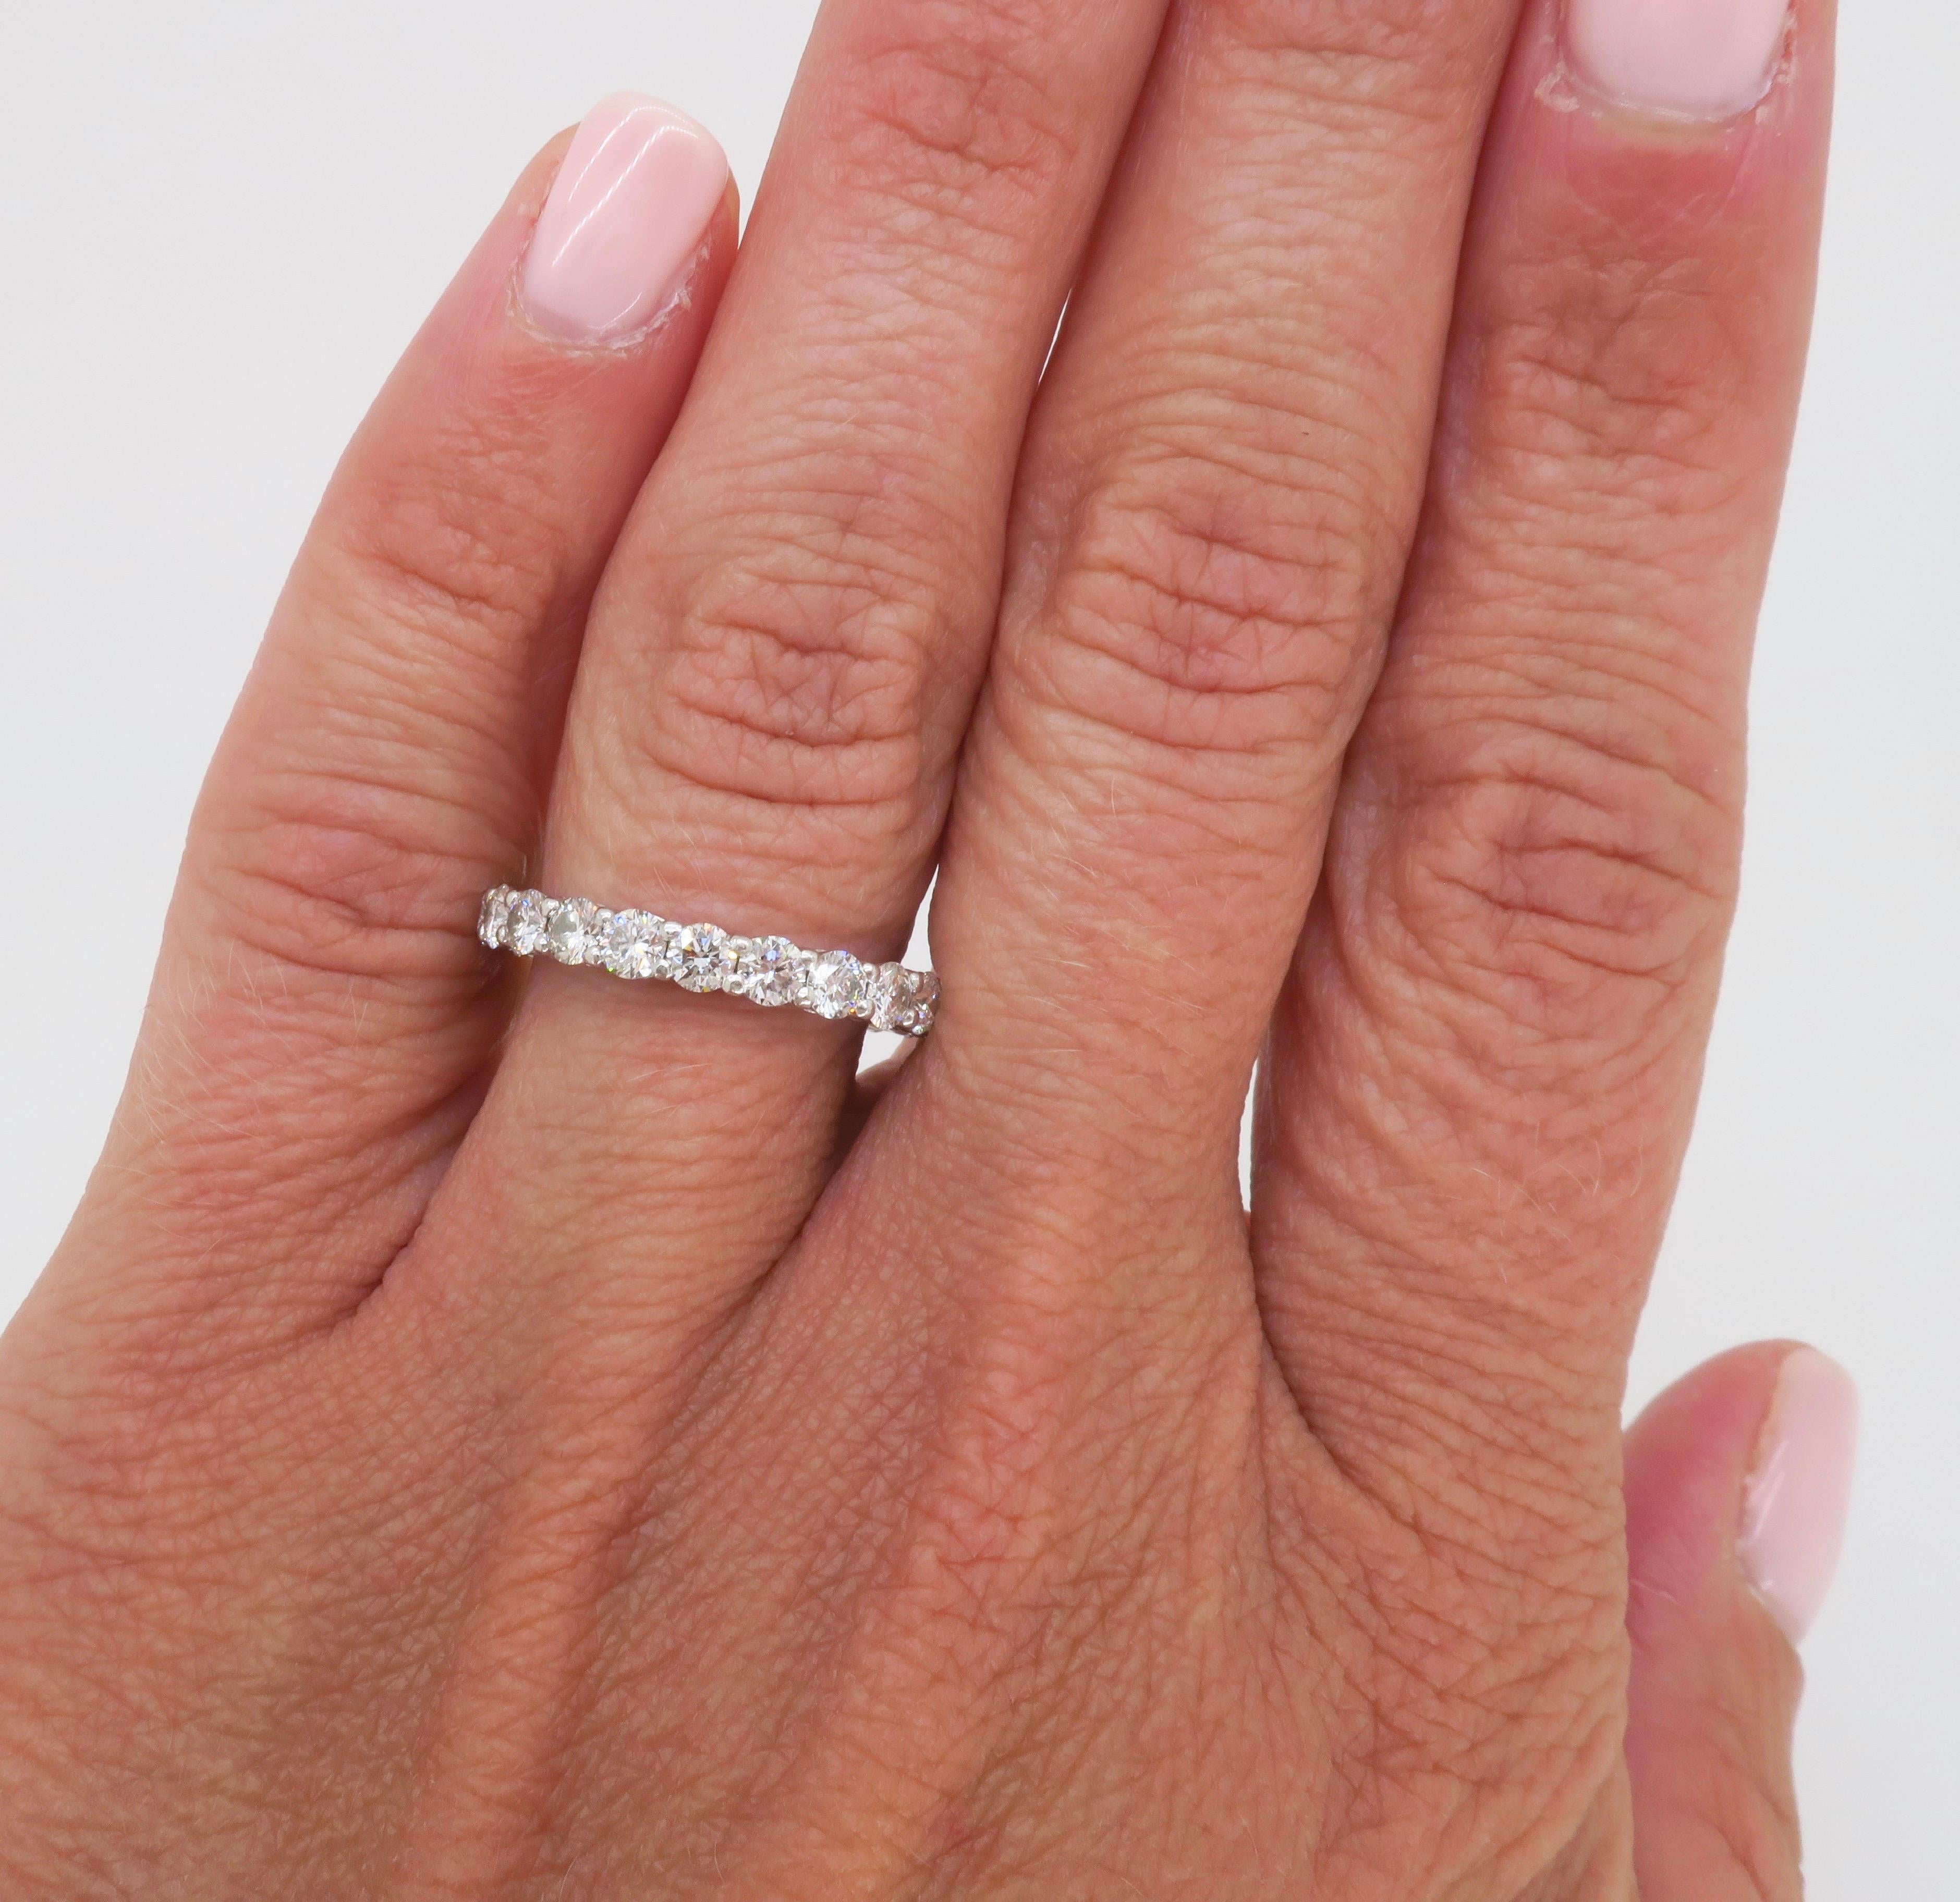 Tiffany & Co. Embrace Diamond Eternity band made in Platinum with 1.80ctw of Round Brilliant Cut Diamonds. 

Diamond Cut: Round Brilliant Cut
Total Diamond Carat Weight: 1.8CTW
Ring Width: 3mm
Average Diamond Color: E-F
Average Diamond Clarity: